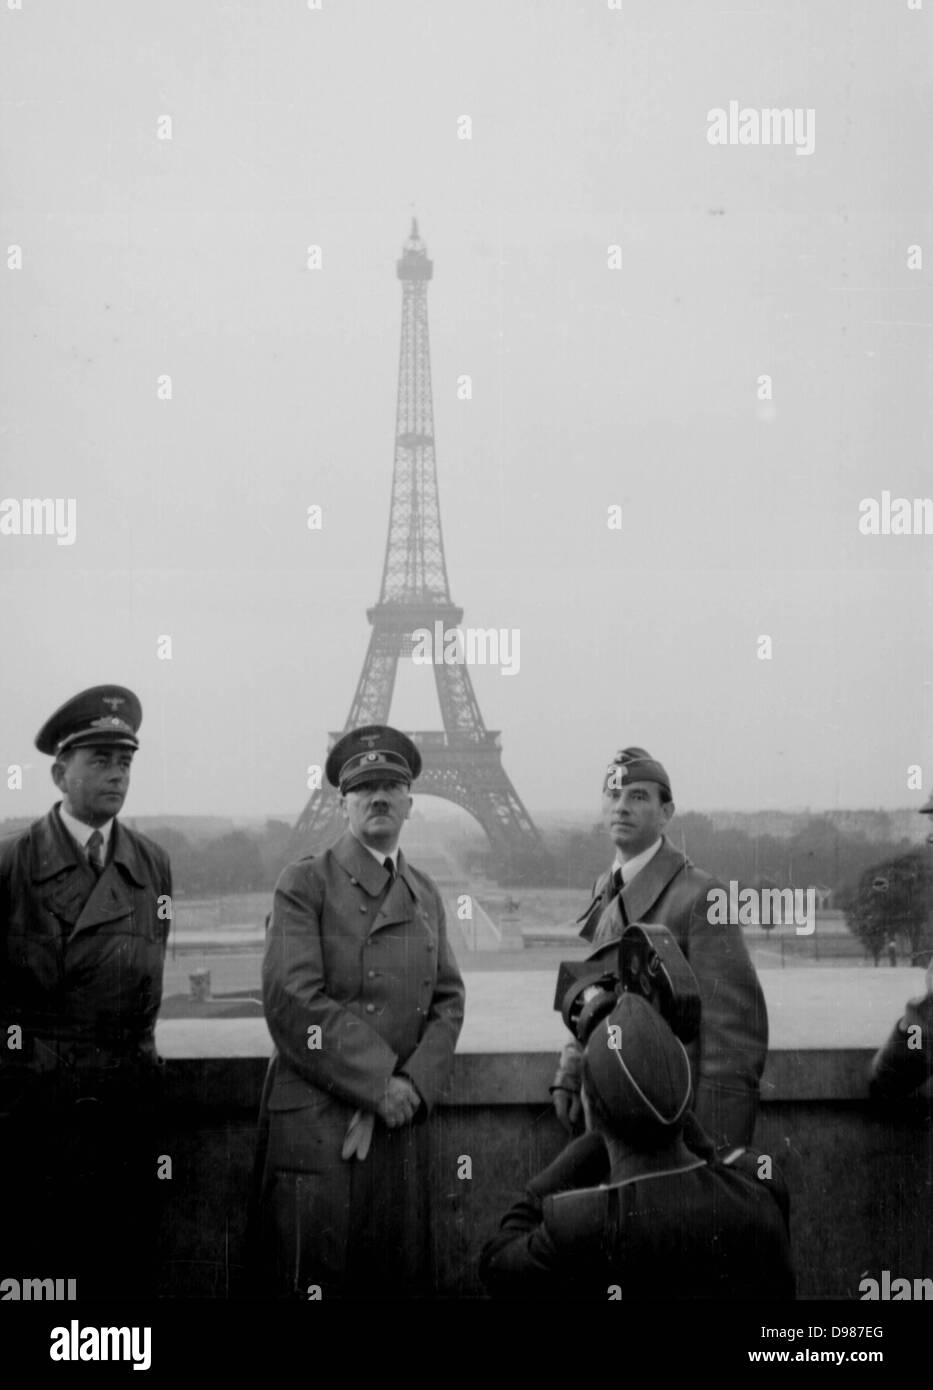 Adolf Hitler in Paris, France, June 1940, the Eiffel tower in the background. Paris was occupied by German forces on 13 June 1940. Stock Photo